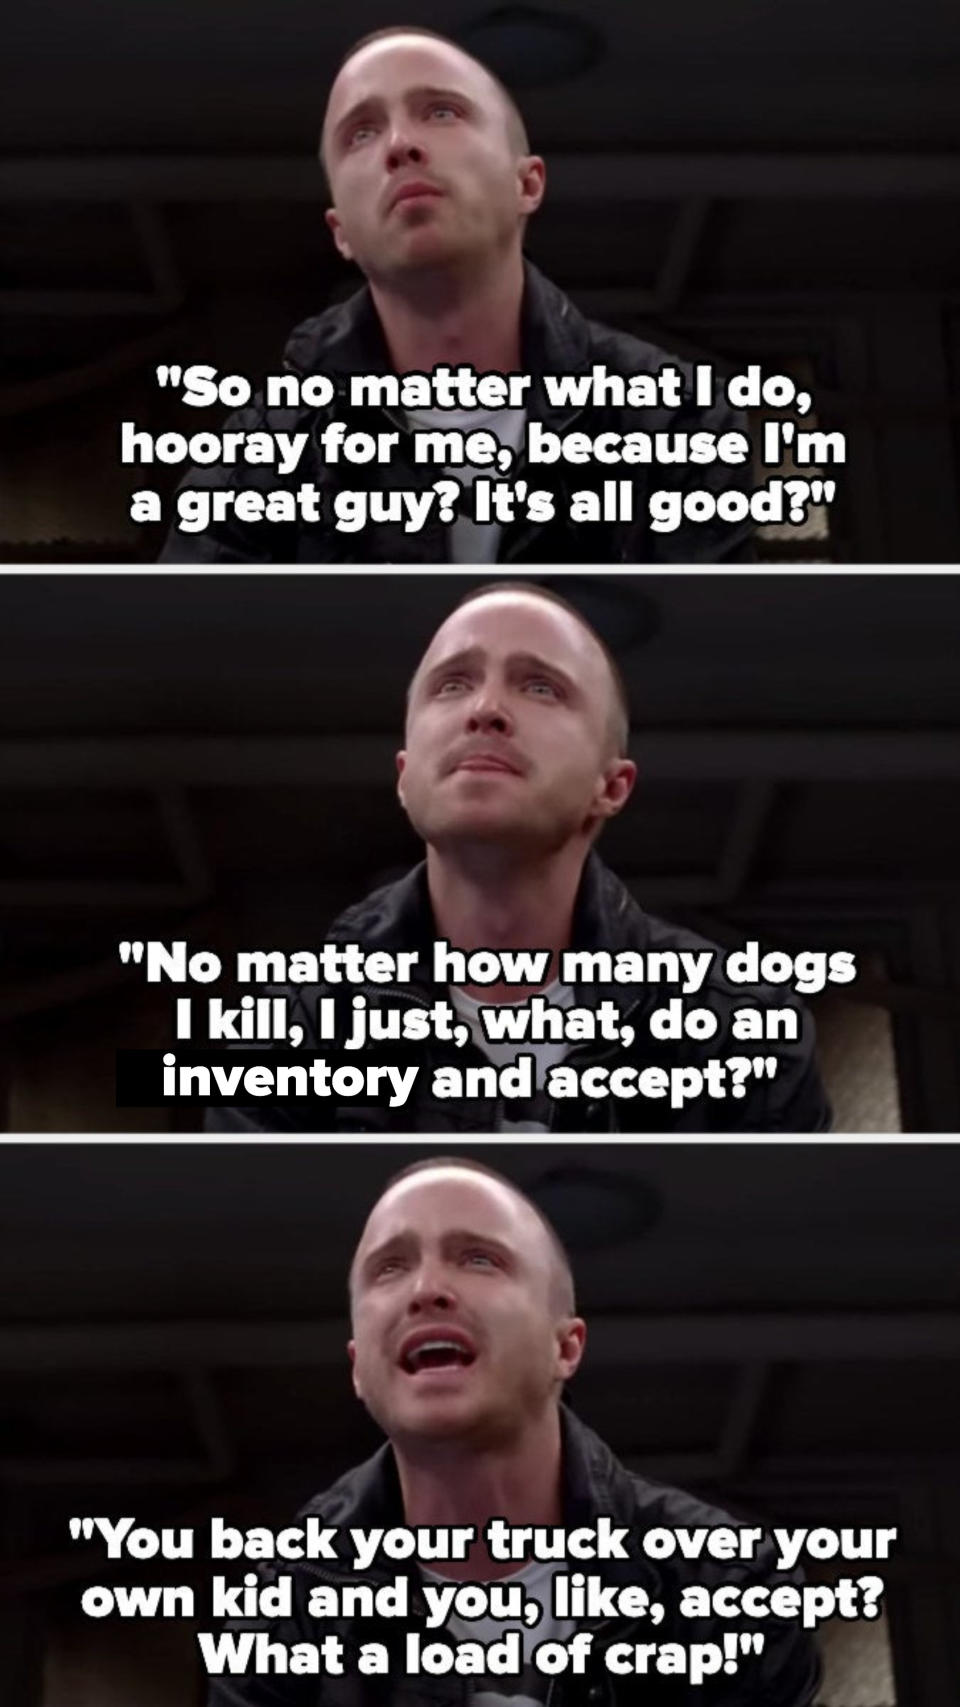 Jessie asks if then it doesn't matter what he does or how many dogs he kills, because if he's a good guy and "accepts" it it's okay, then calls that a load of crap